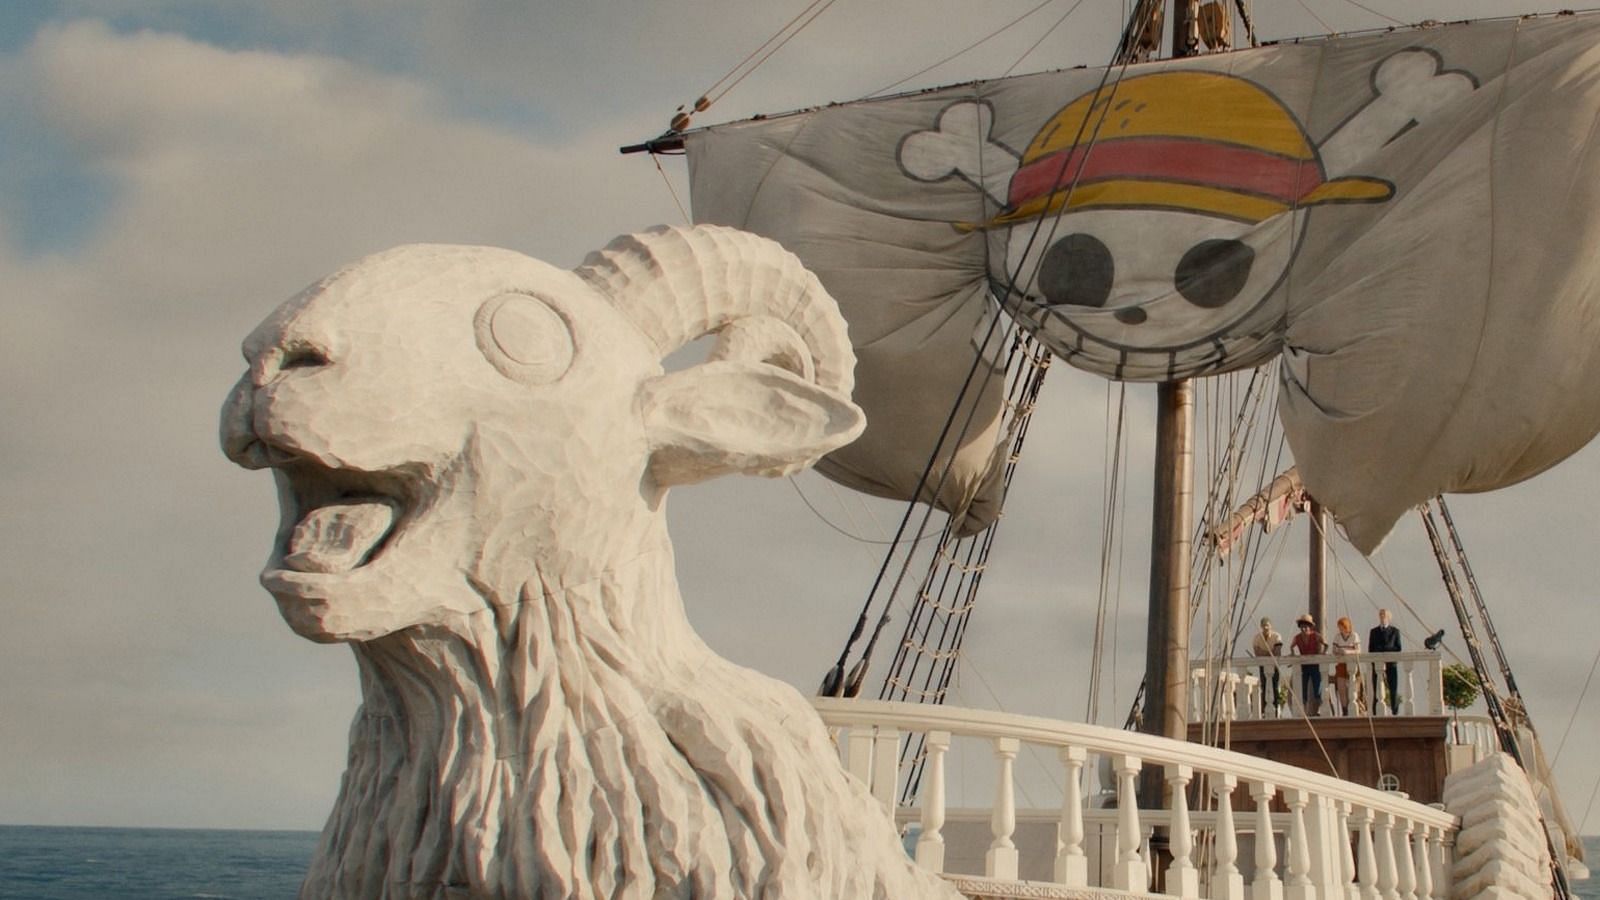 Going Merry as seen in the live-action series (Image via Netflix)